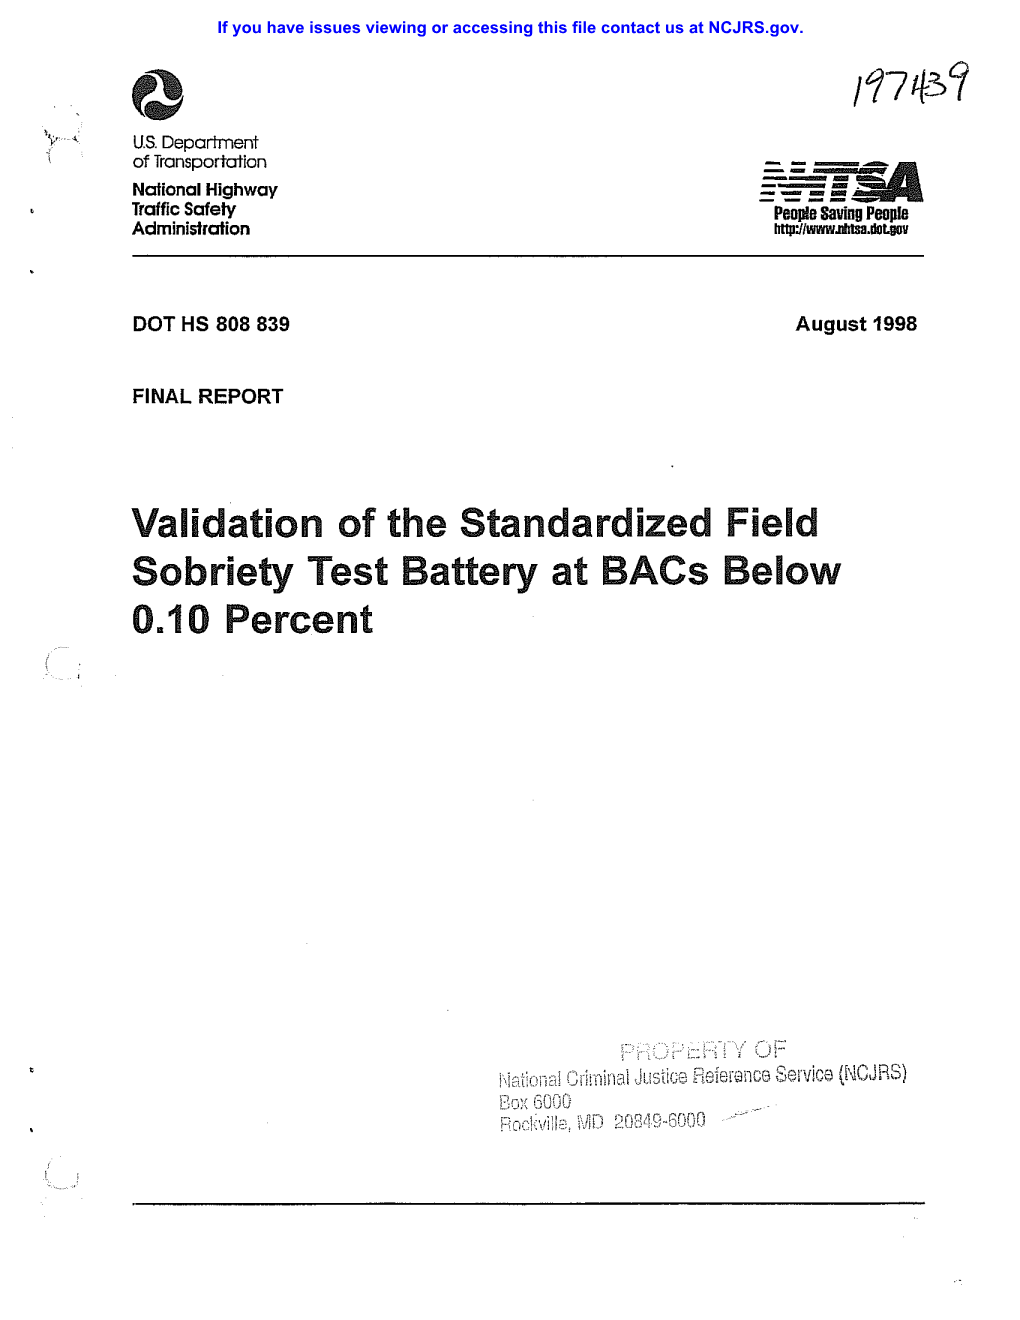 Validation of the Standardized Field Sobriety Test Battery at Bacs Below 0.10 Percent